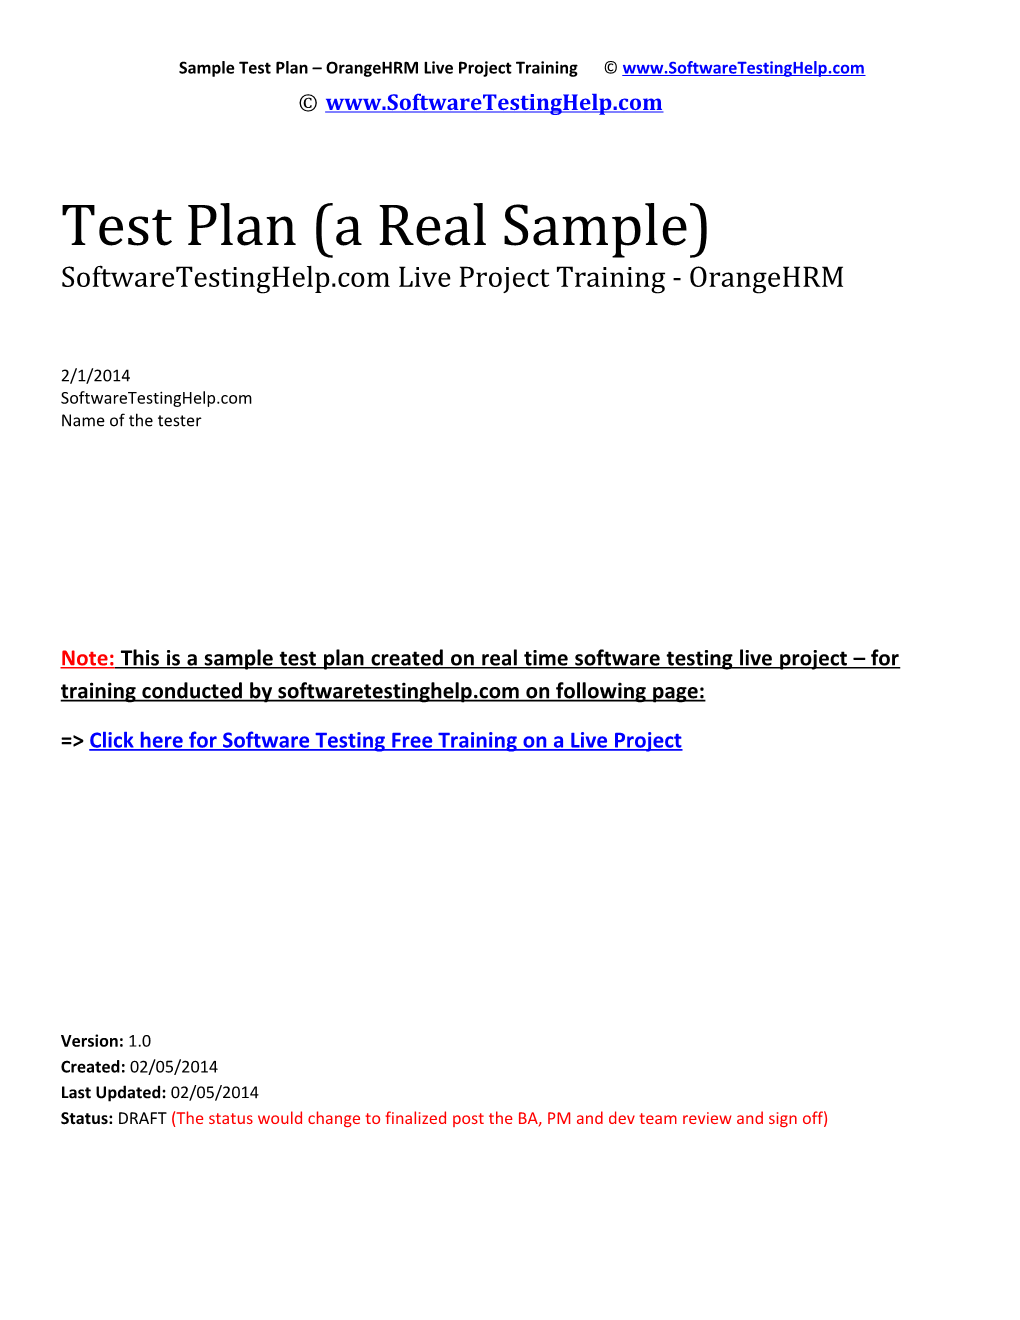 Test Plan (A Real Sample)